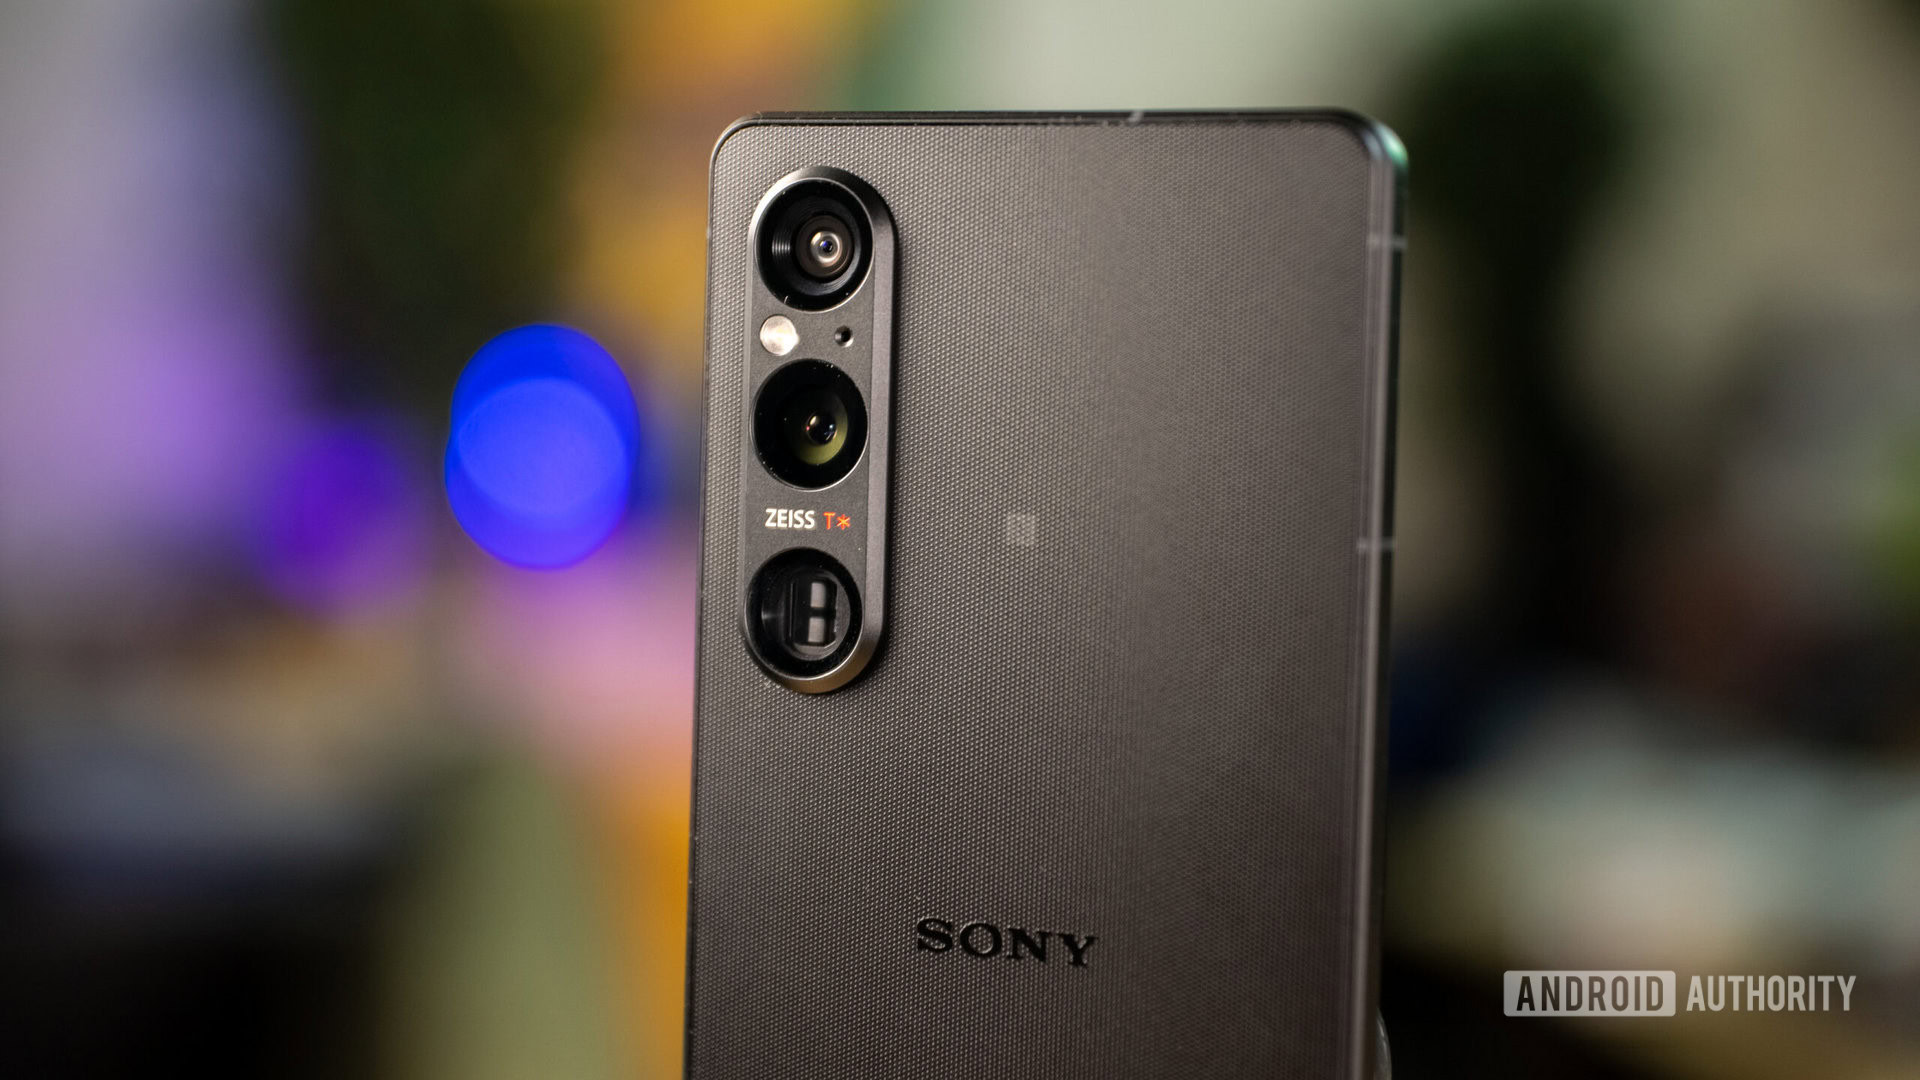 Sony Xperia 1 V: Specs, pricing, availability, and more